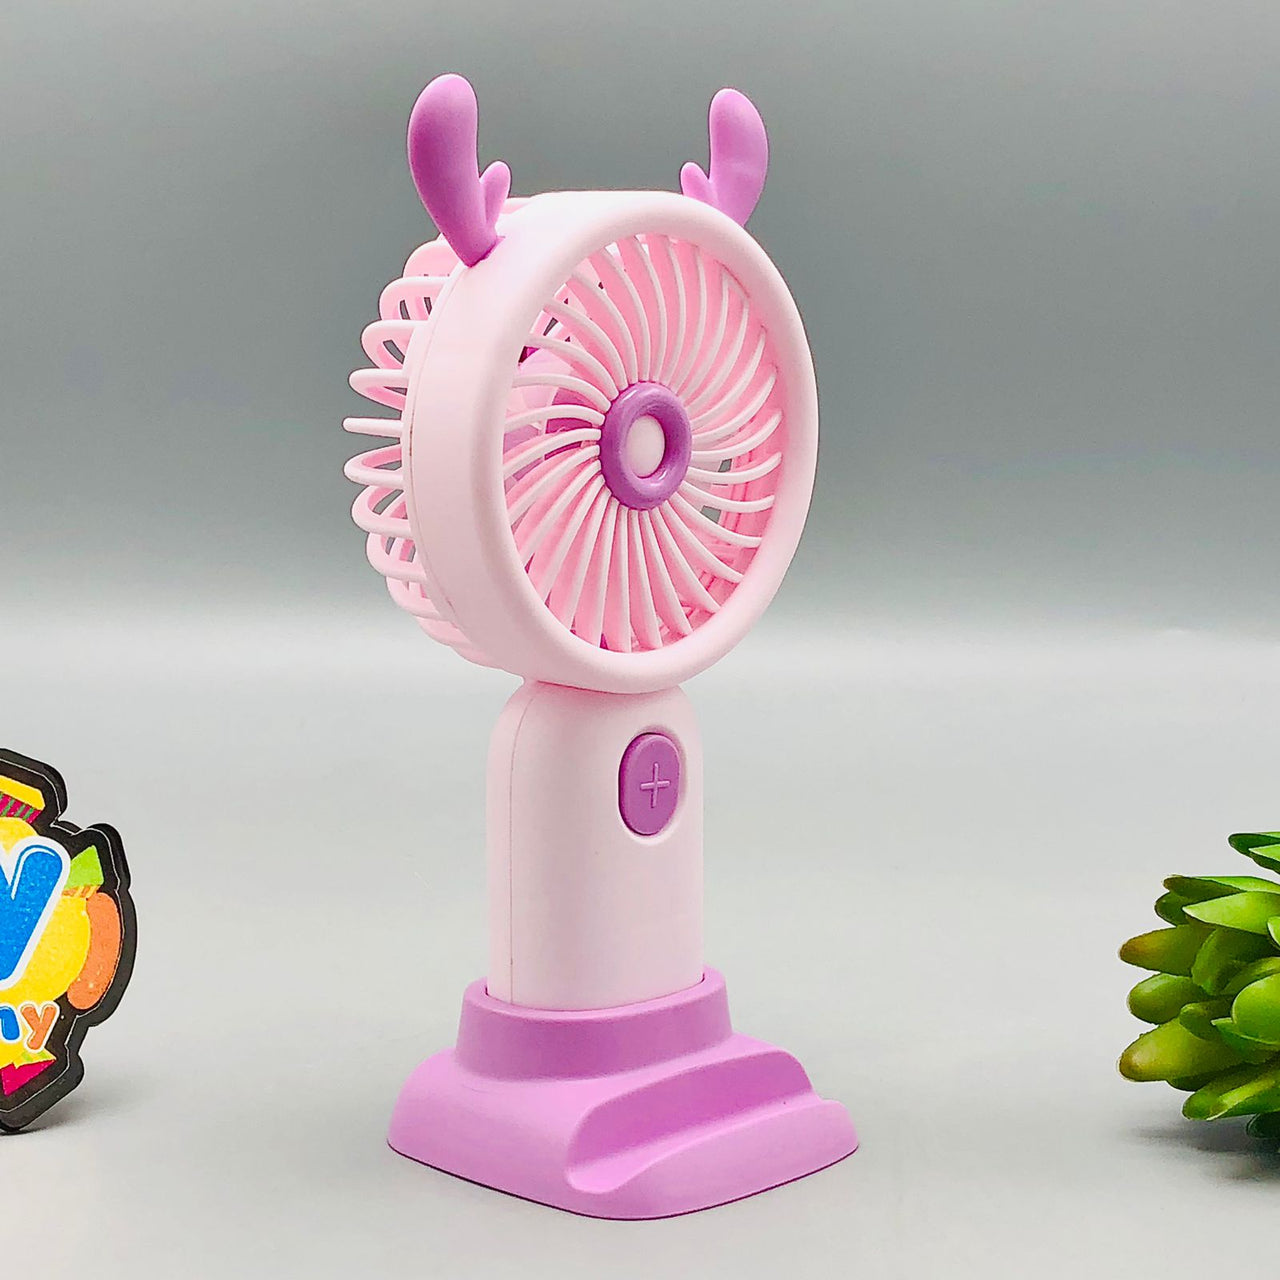 Mini Rechargeable Adorable Design Fan With Mobile Phone Bracket